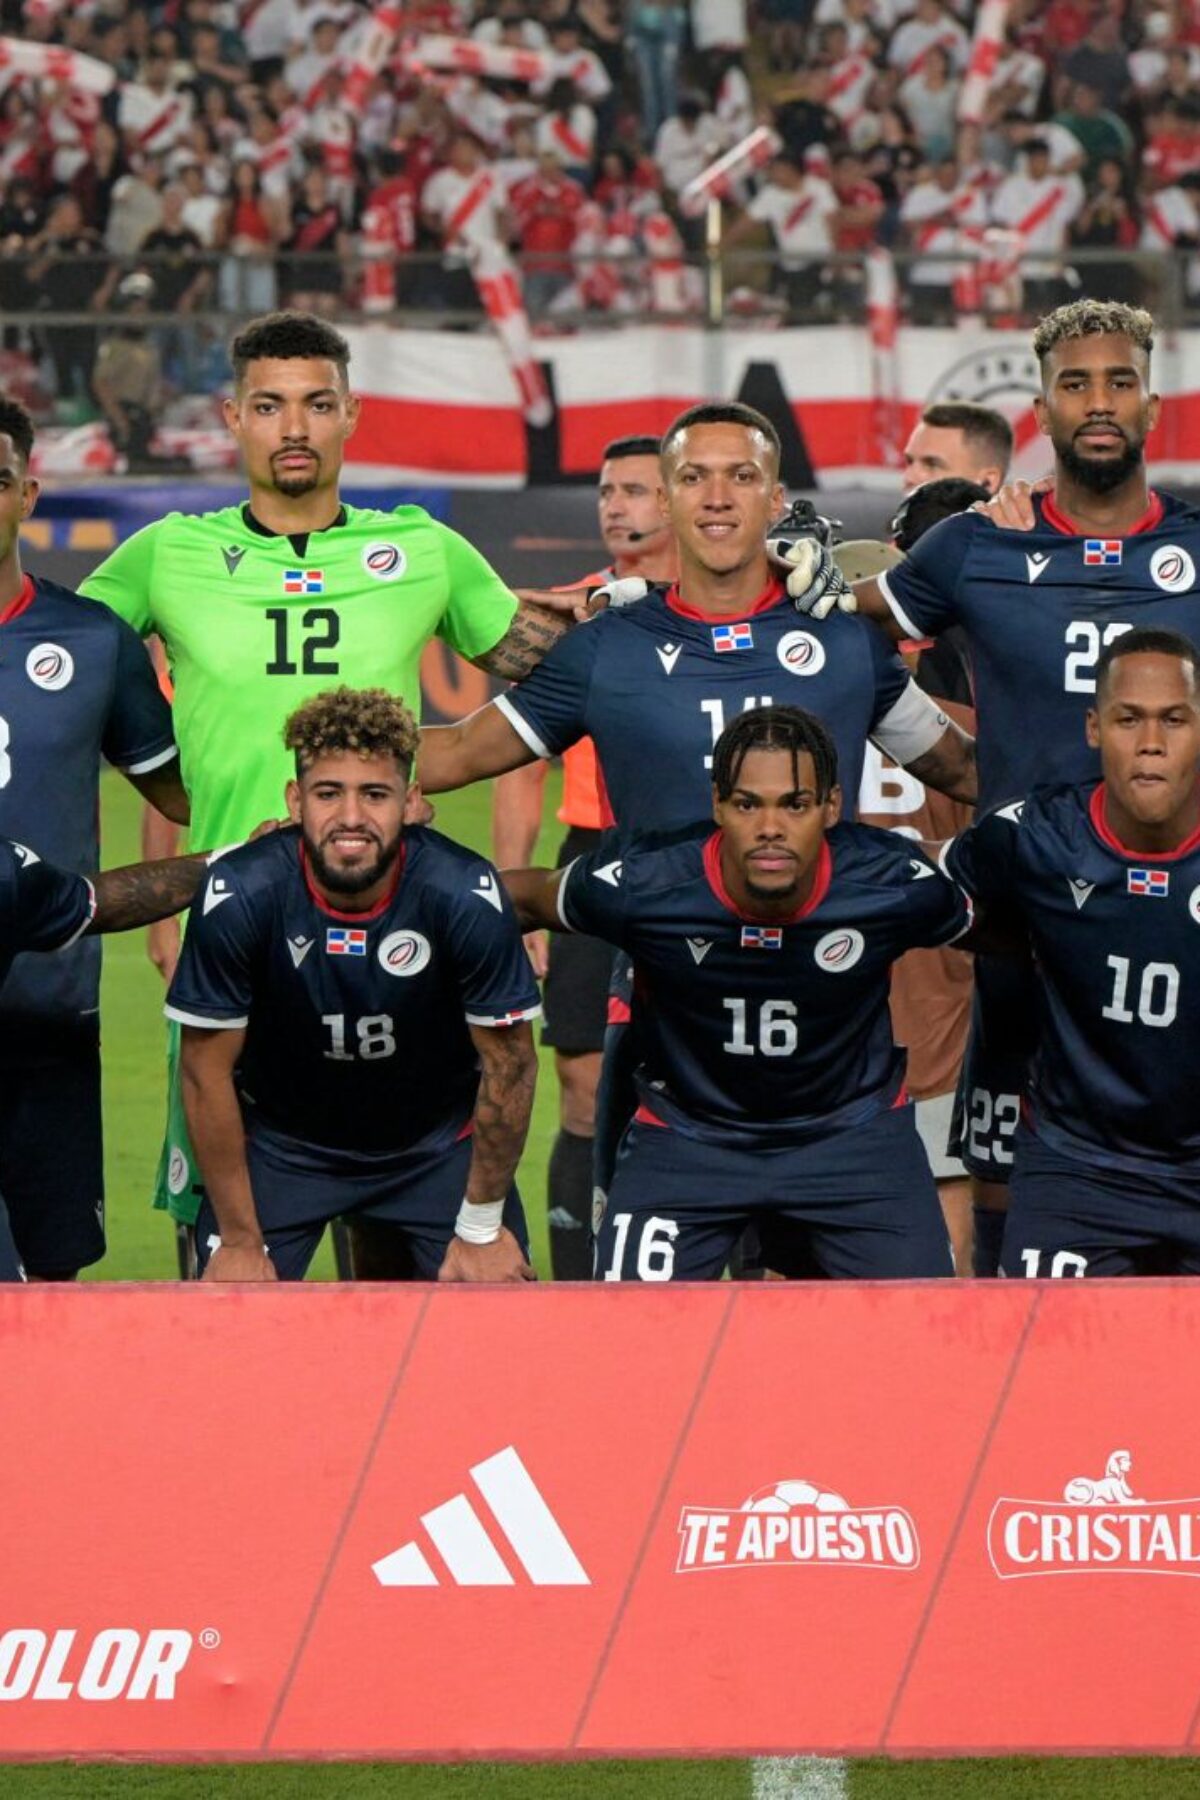 Dominican Republic's players pose for a picture before the start of the international friendly football match between Peru and Dominican Republic at the Monumental Stadium in Lima on March 26, 2024. (Photo by ERNESTO BENAVIDES / AFP) (Photo by ERNESTO BENAVIDES/AFP via Getty Images)